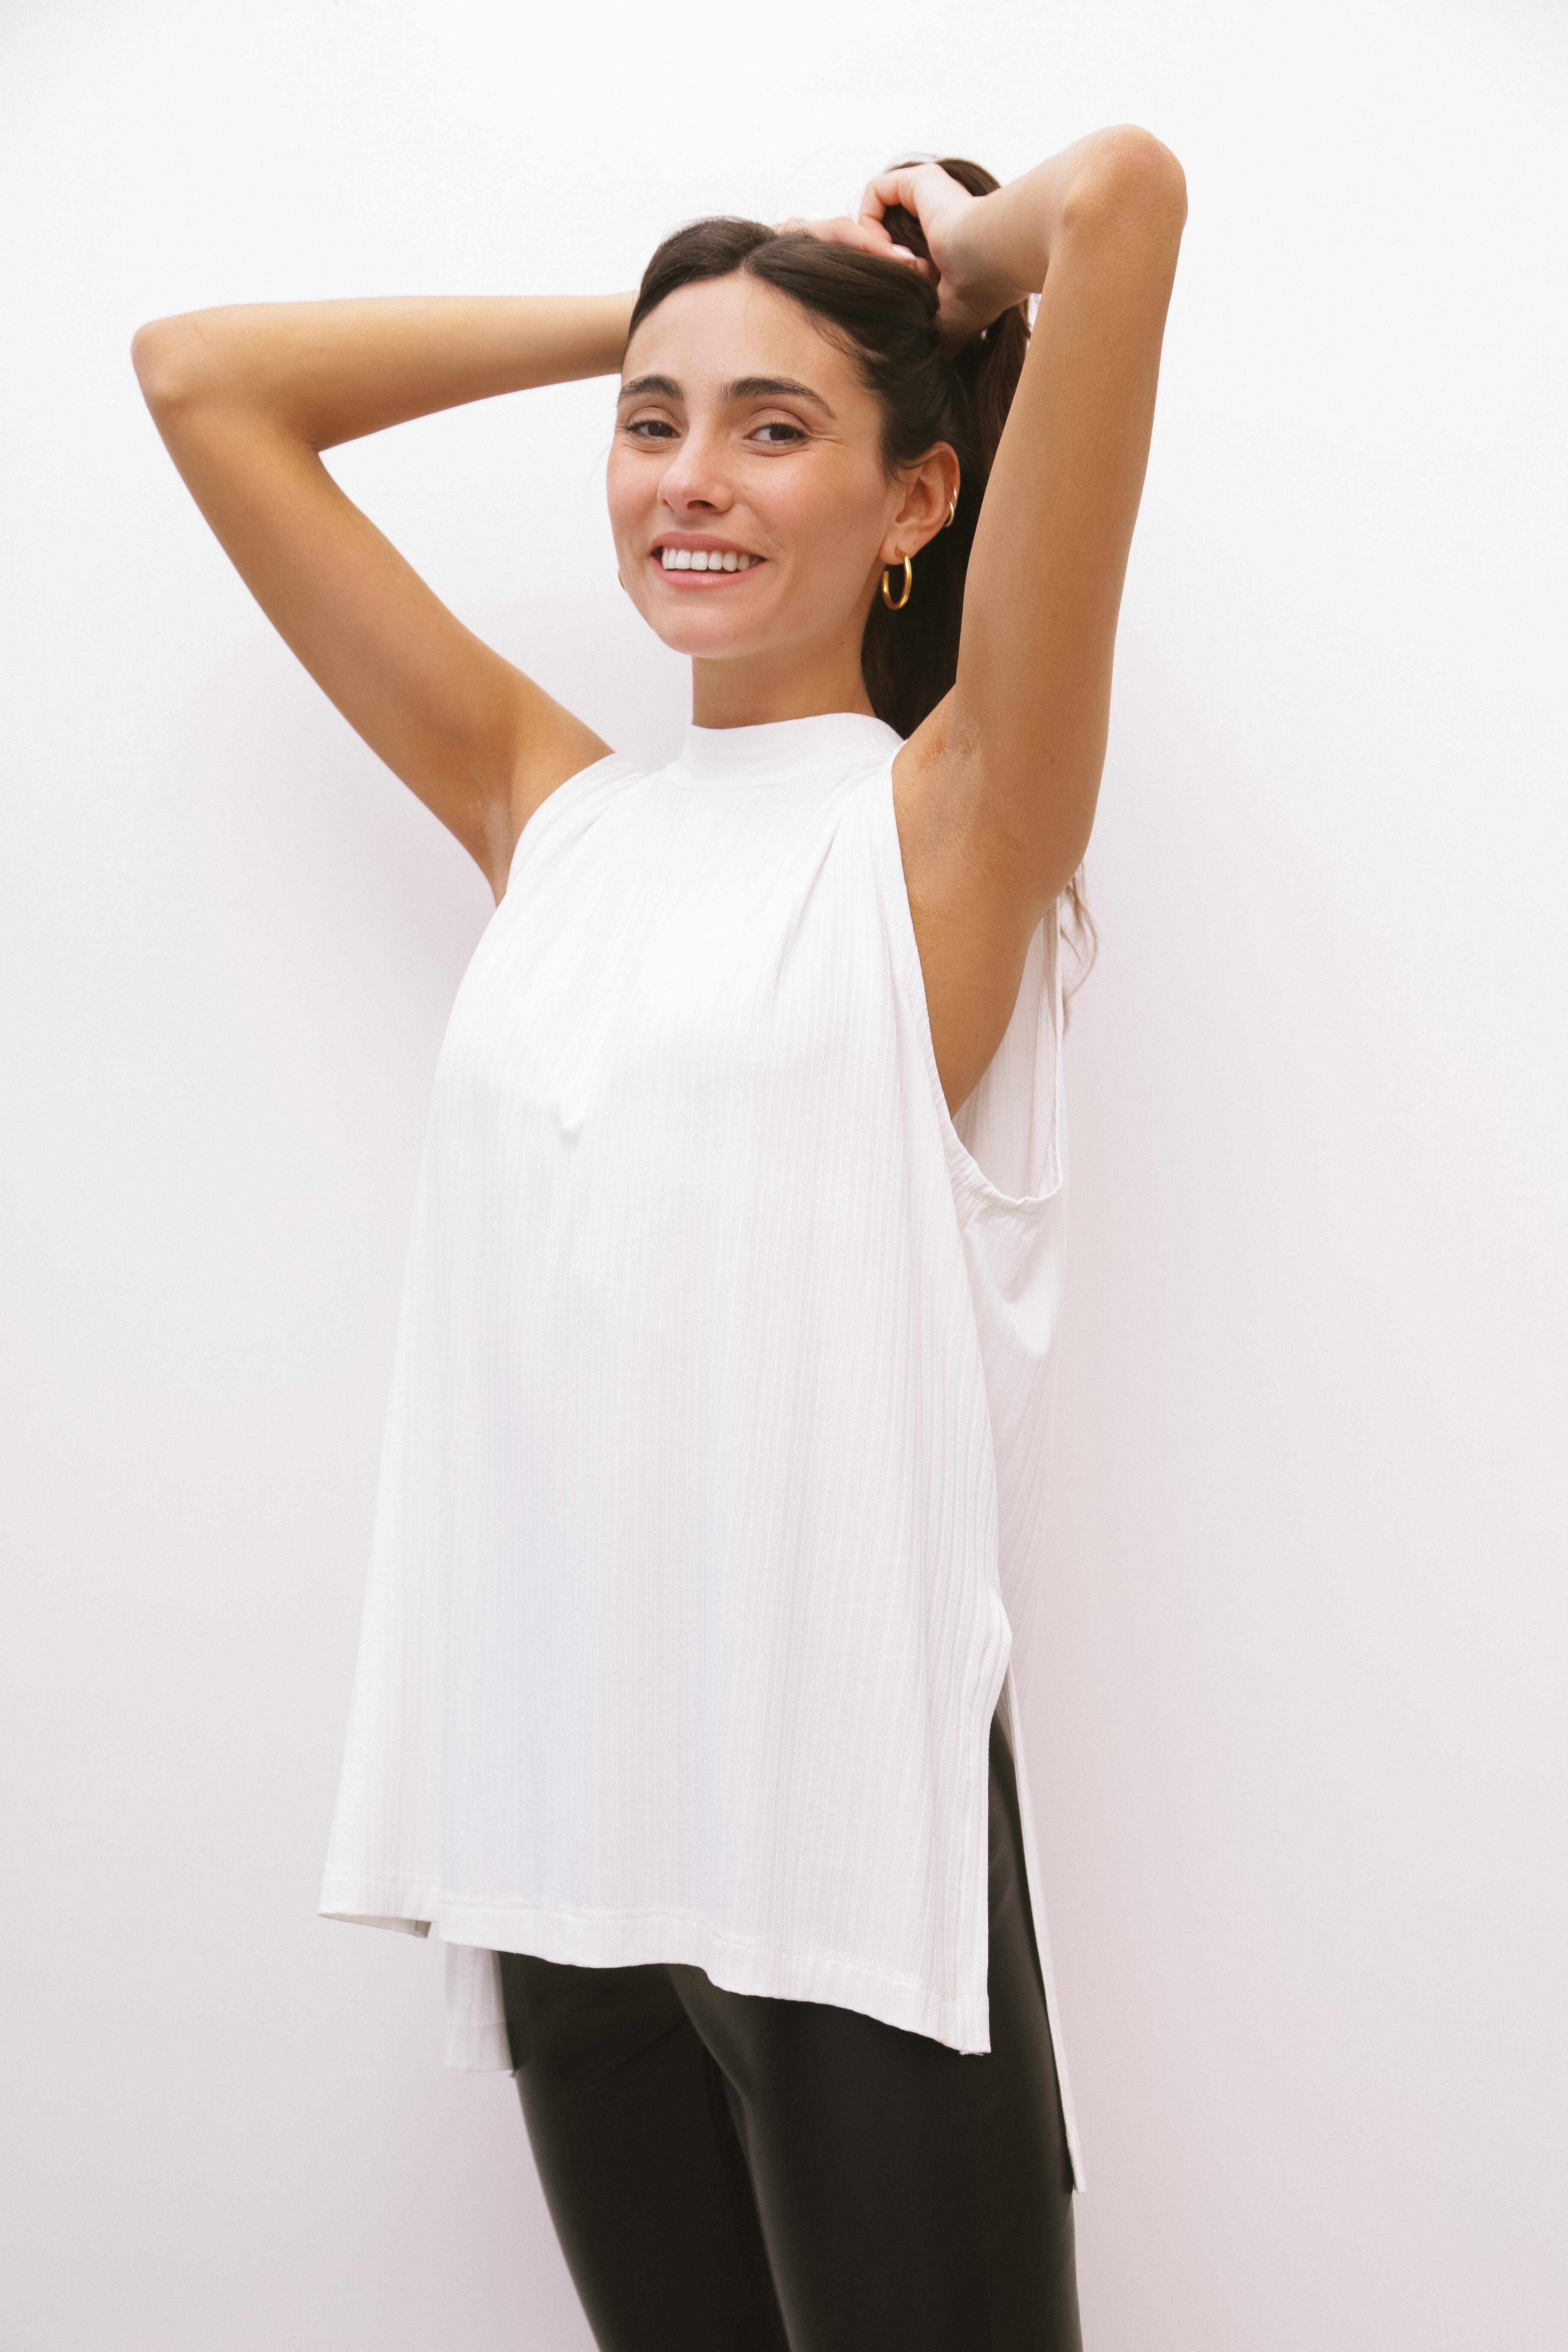 MUSCULOSA LOS ÁNGELES - OFF WHITE